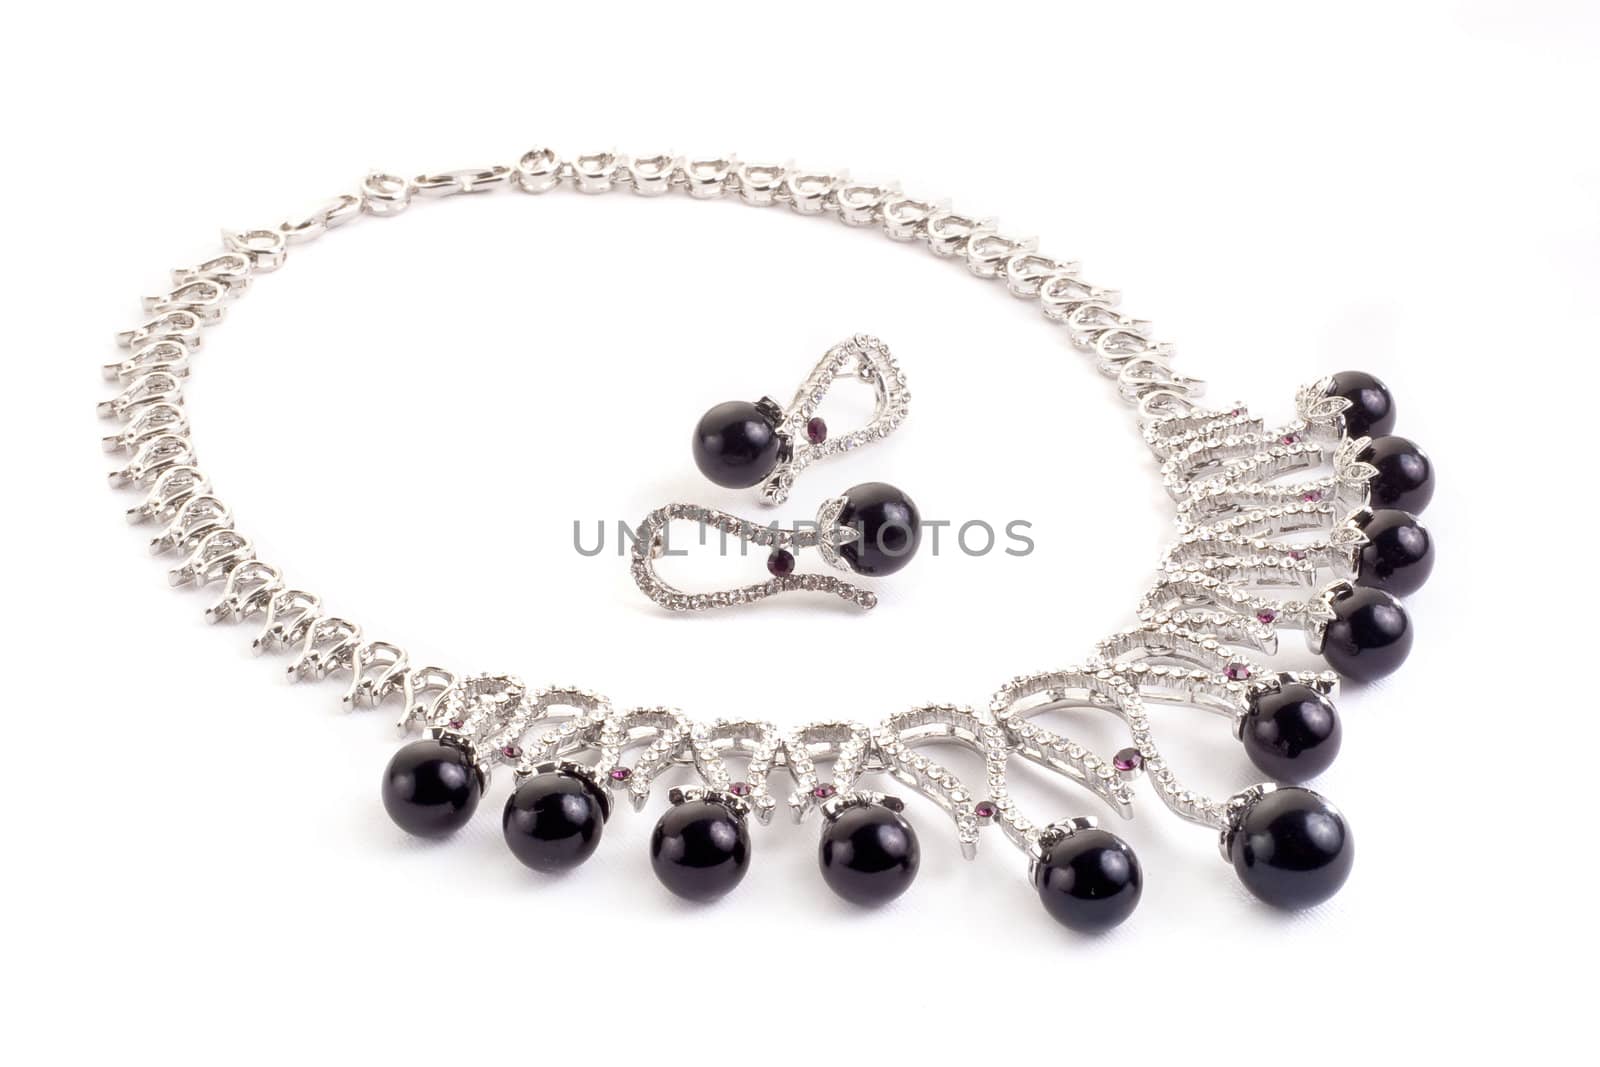 Necklace with black pearls on a white background